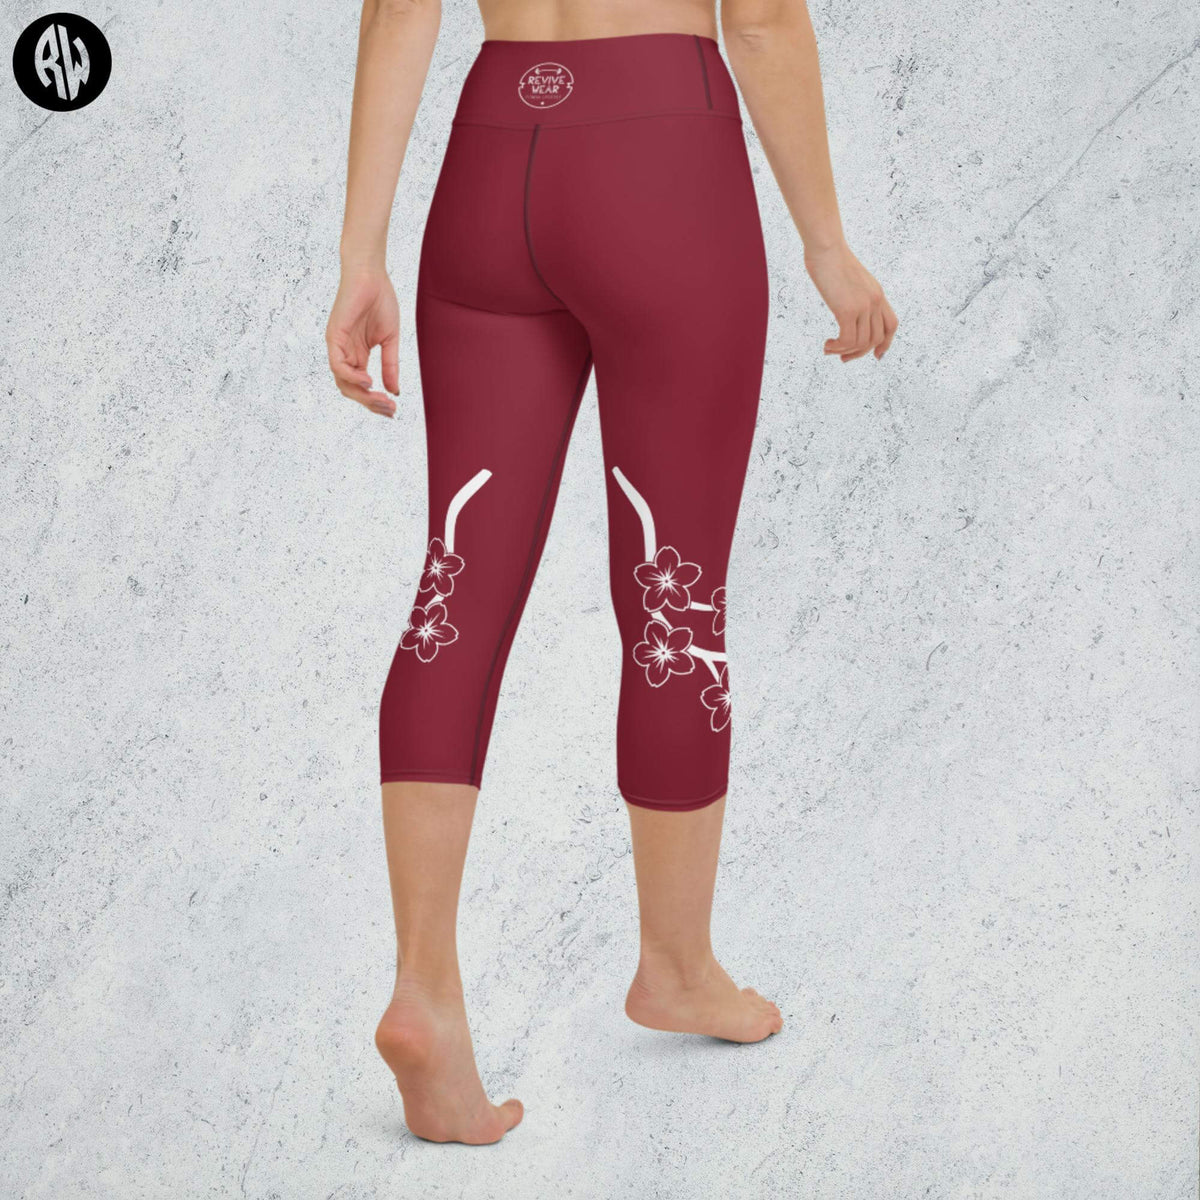 Floral Capri Leggings | Floral Blossom Capri Print - Revive Wear     Our Floral Capri Leggings &amp; Tights have a high, elastic waistband that is the perfect choice for yoga, the gym, and walking. Save Today at Revive Wear